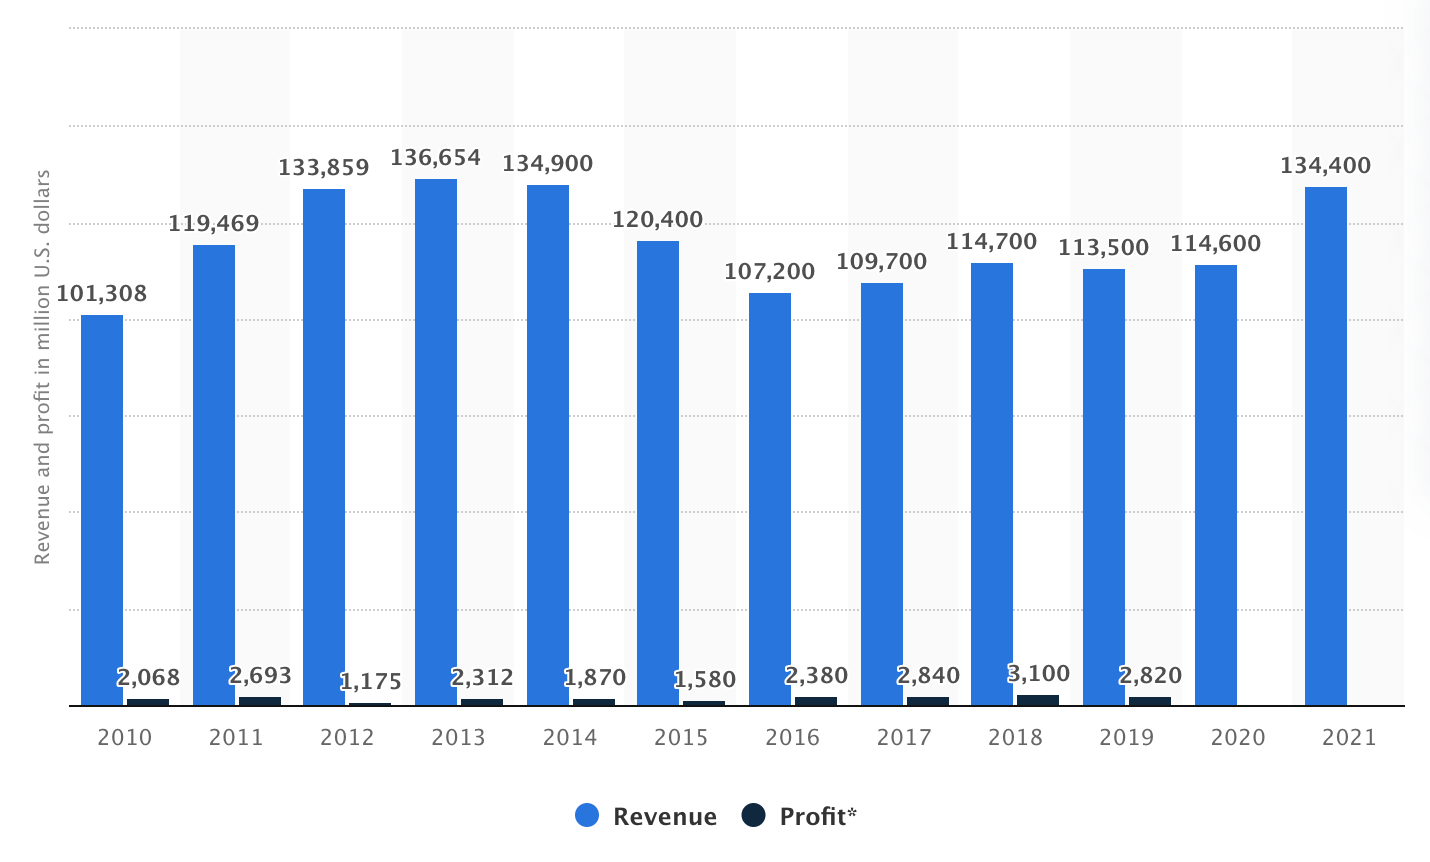 Cargill’s annual revenue compared to their annual profits between 2010 and 2021